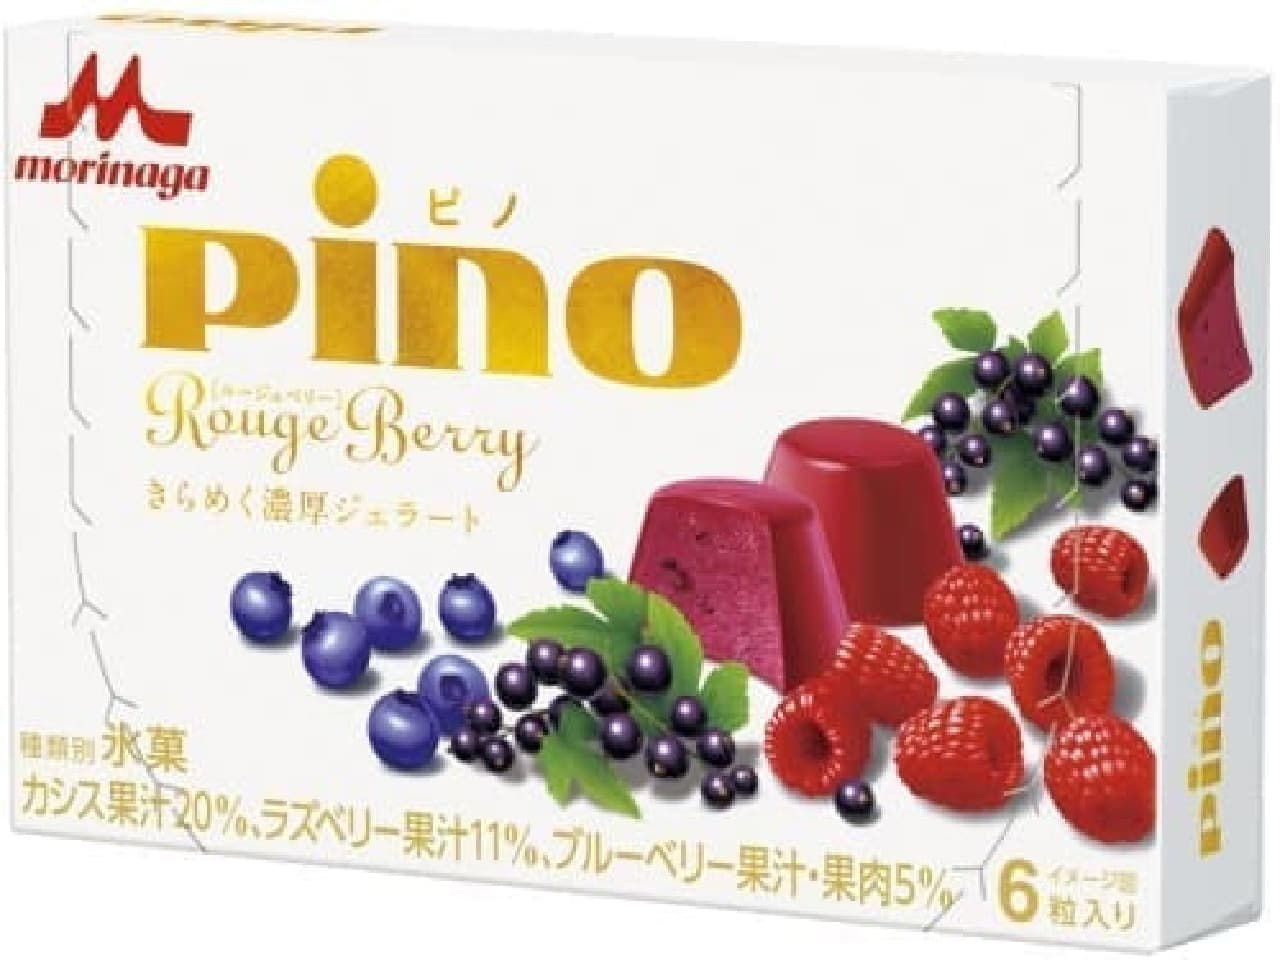 Does your heart sparkle with a bite? Pino Rouge Berry